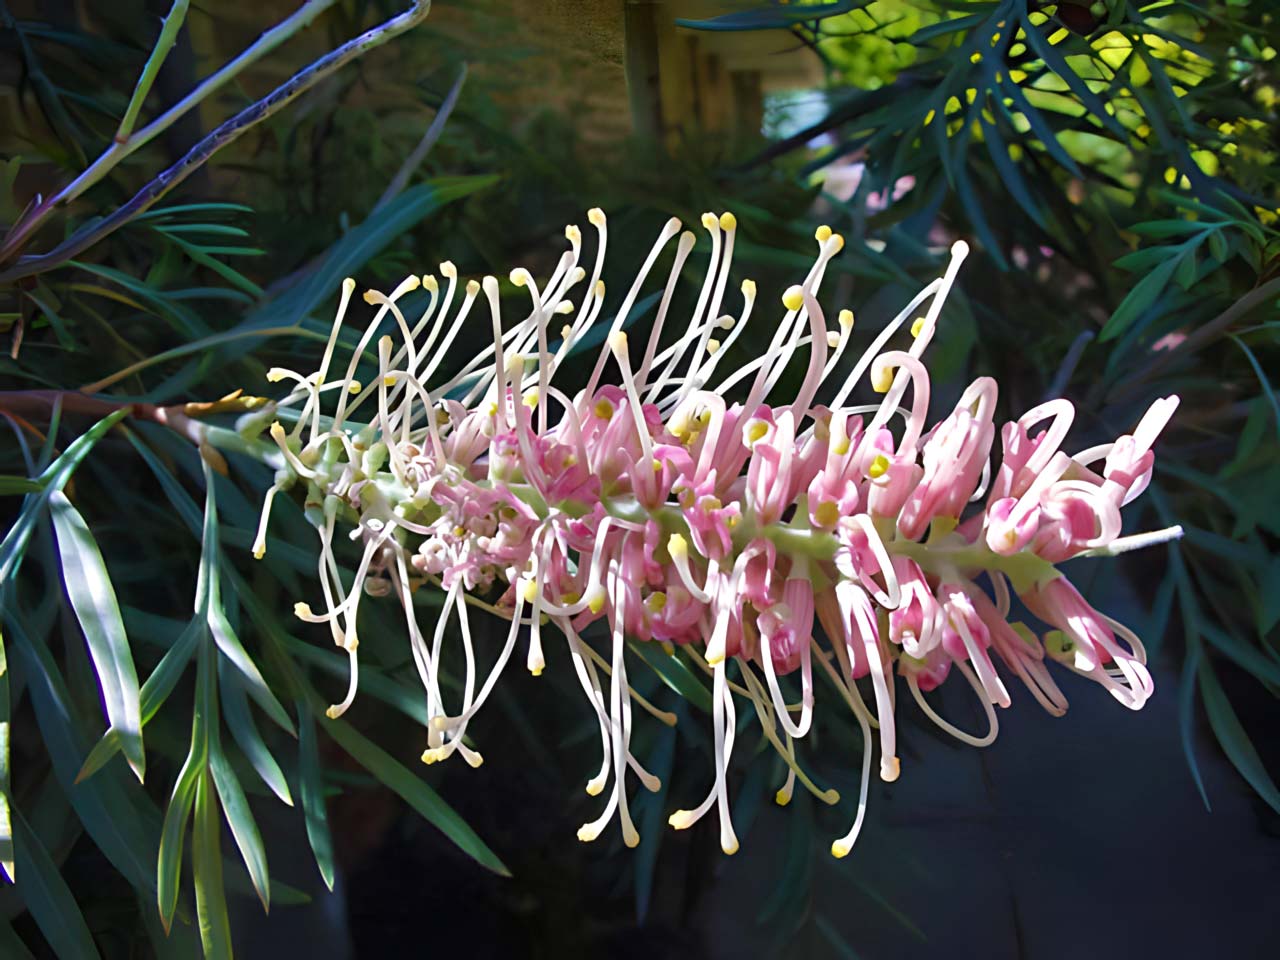 Grevillea 'Misty Pink' - many variations in shade and depth of colour